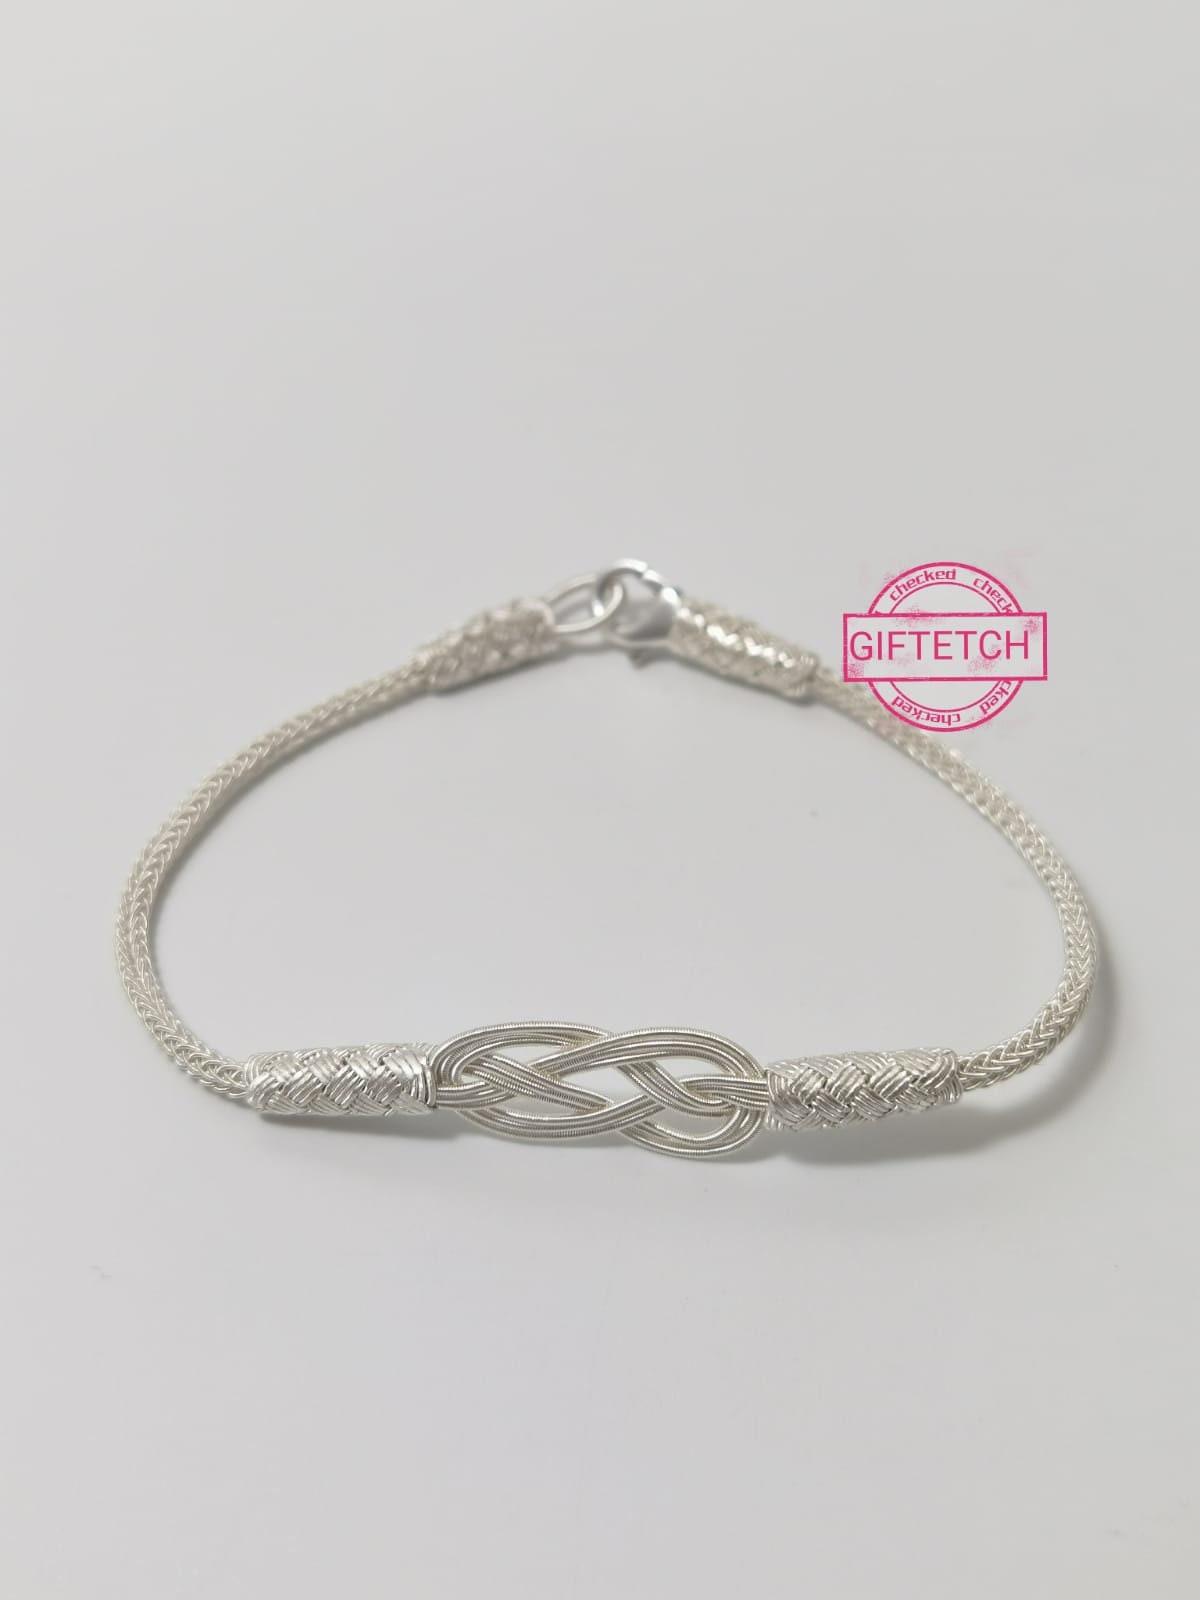 Authentic Classic Ancient Style Handwoven Sterling Silver Celtic Knot Wired Hand Finished Kazaz Bracelet for Men & Women By Giftetch